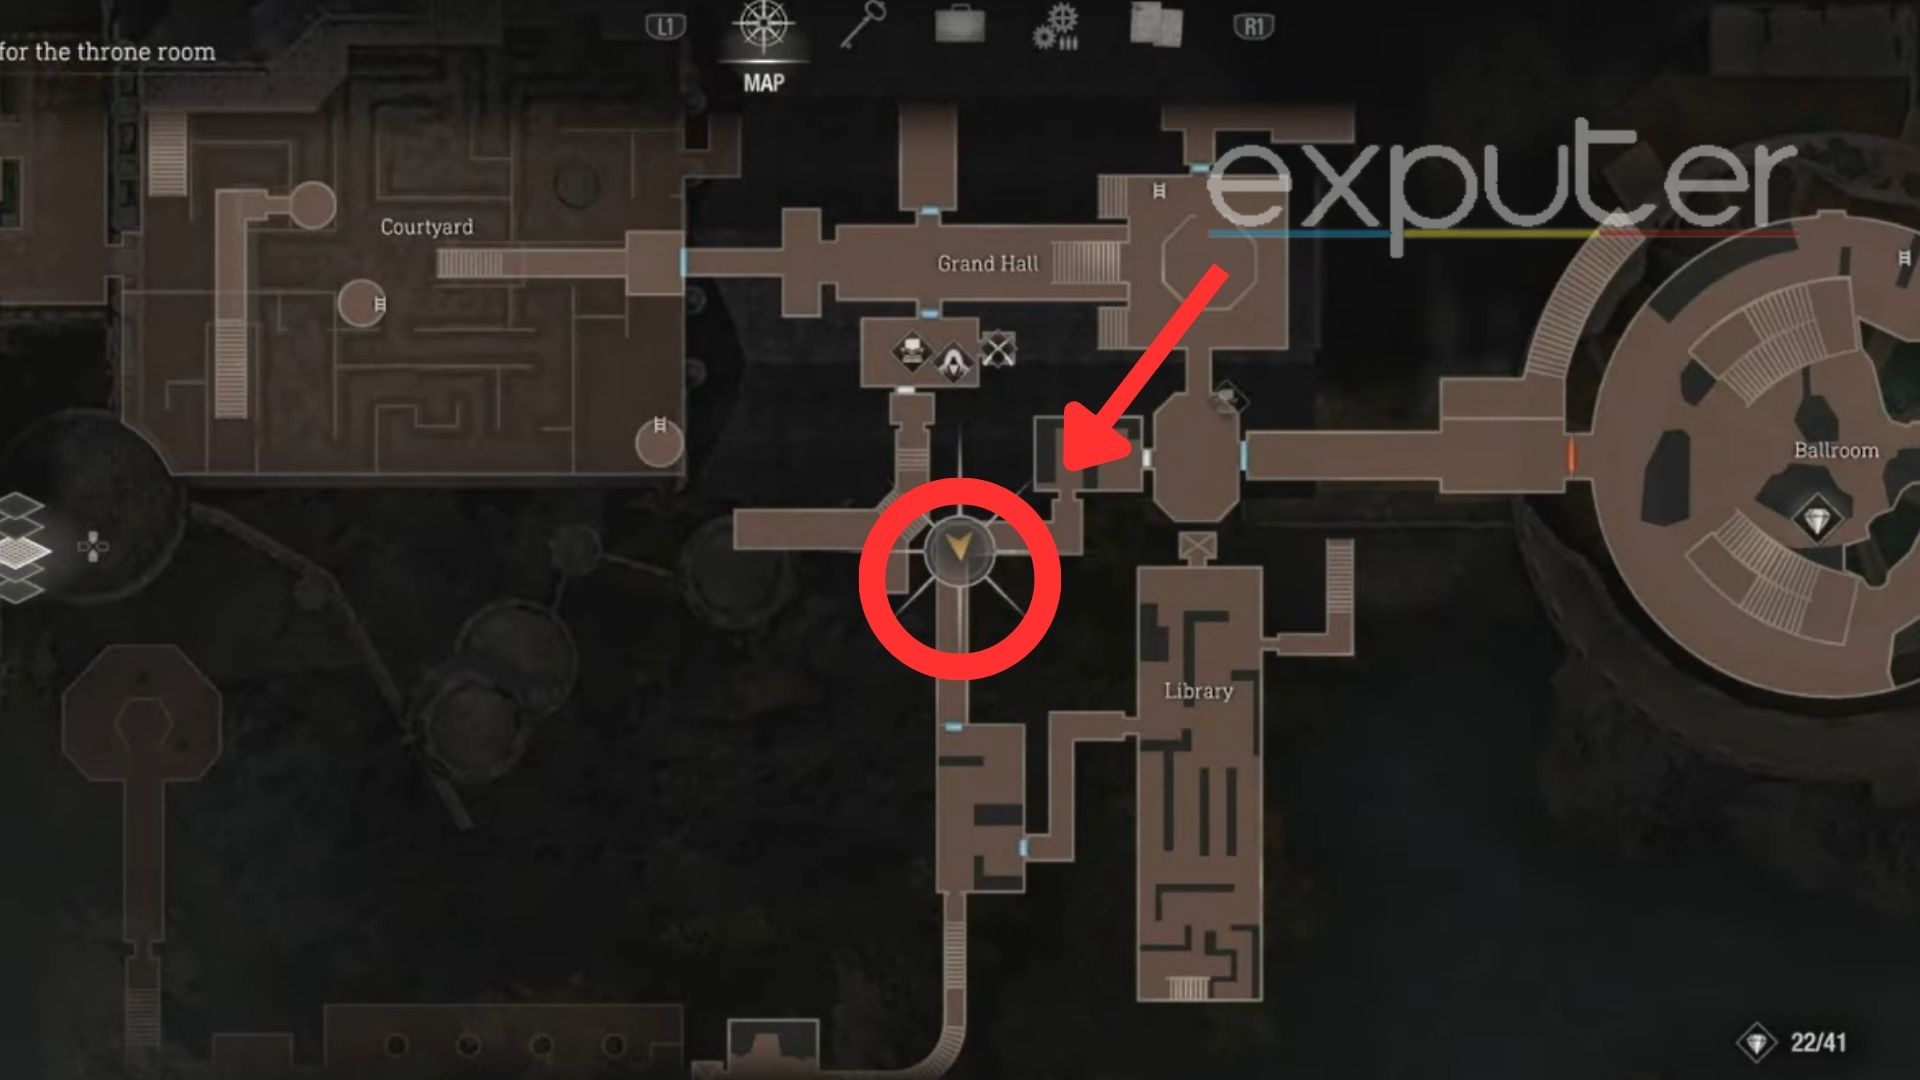 rats location in the game